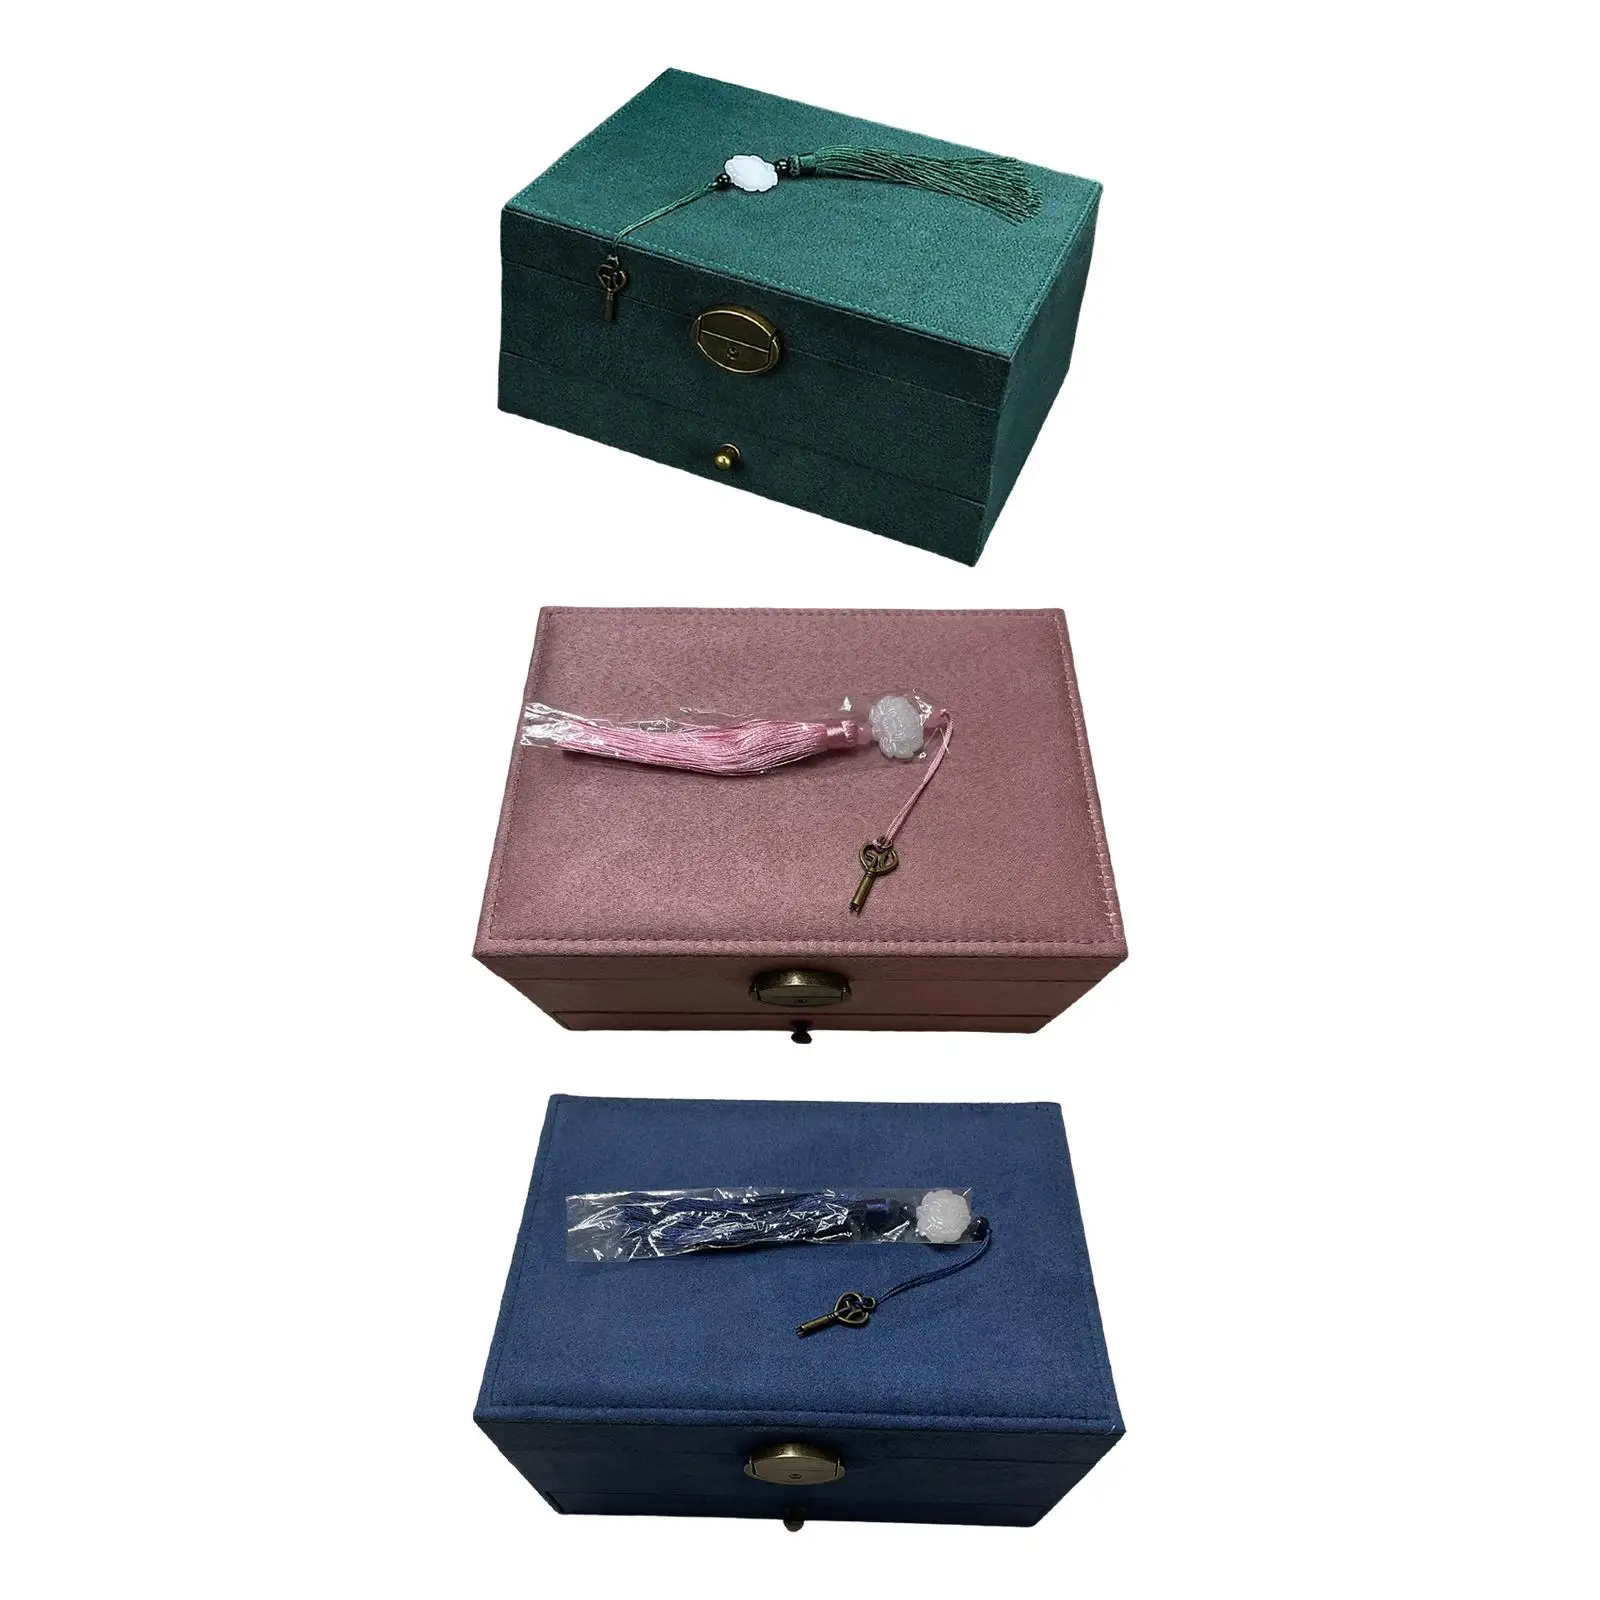 

3 Tier Jewelry Box Elegant with Tassel Lock Lockable Large Capacity Portable Organizer for Necklace Bangles Earrings Pendant